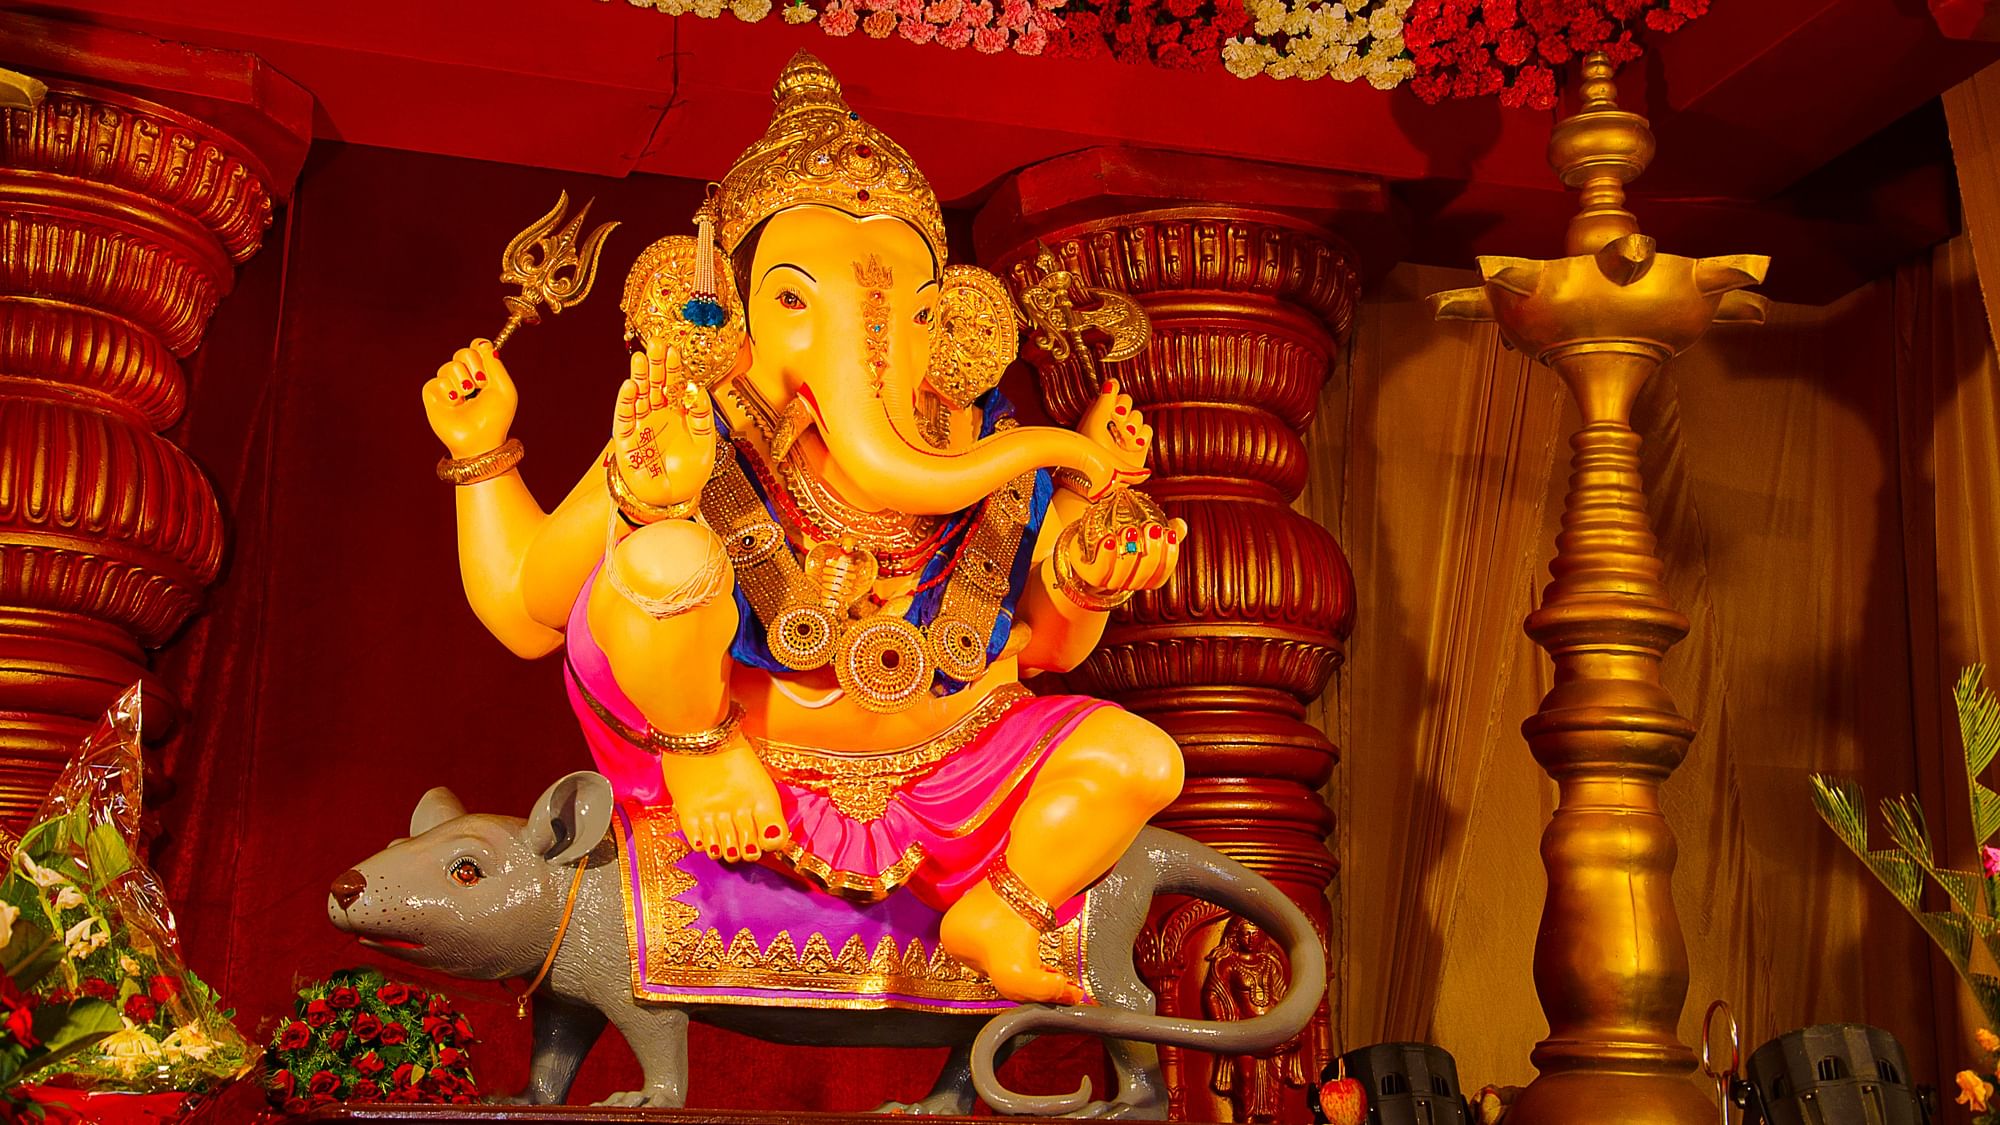 Ganesh Chaturthi is being celebrated on 2 September 2019.